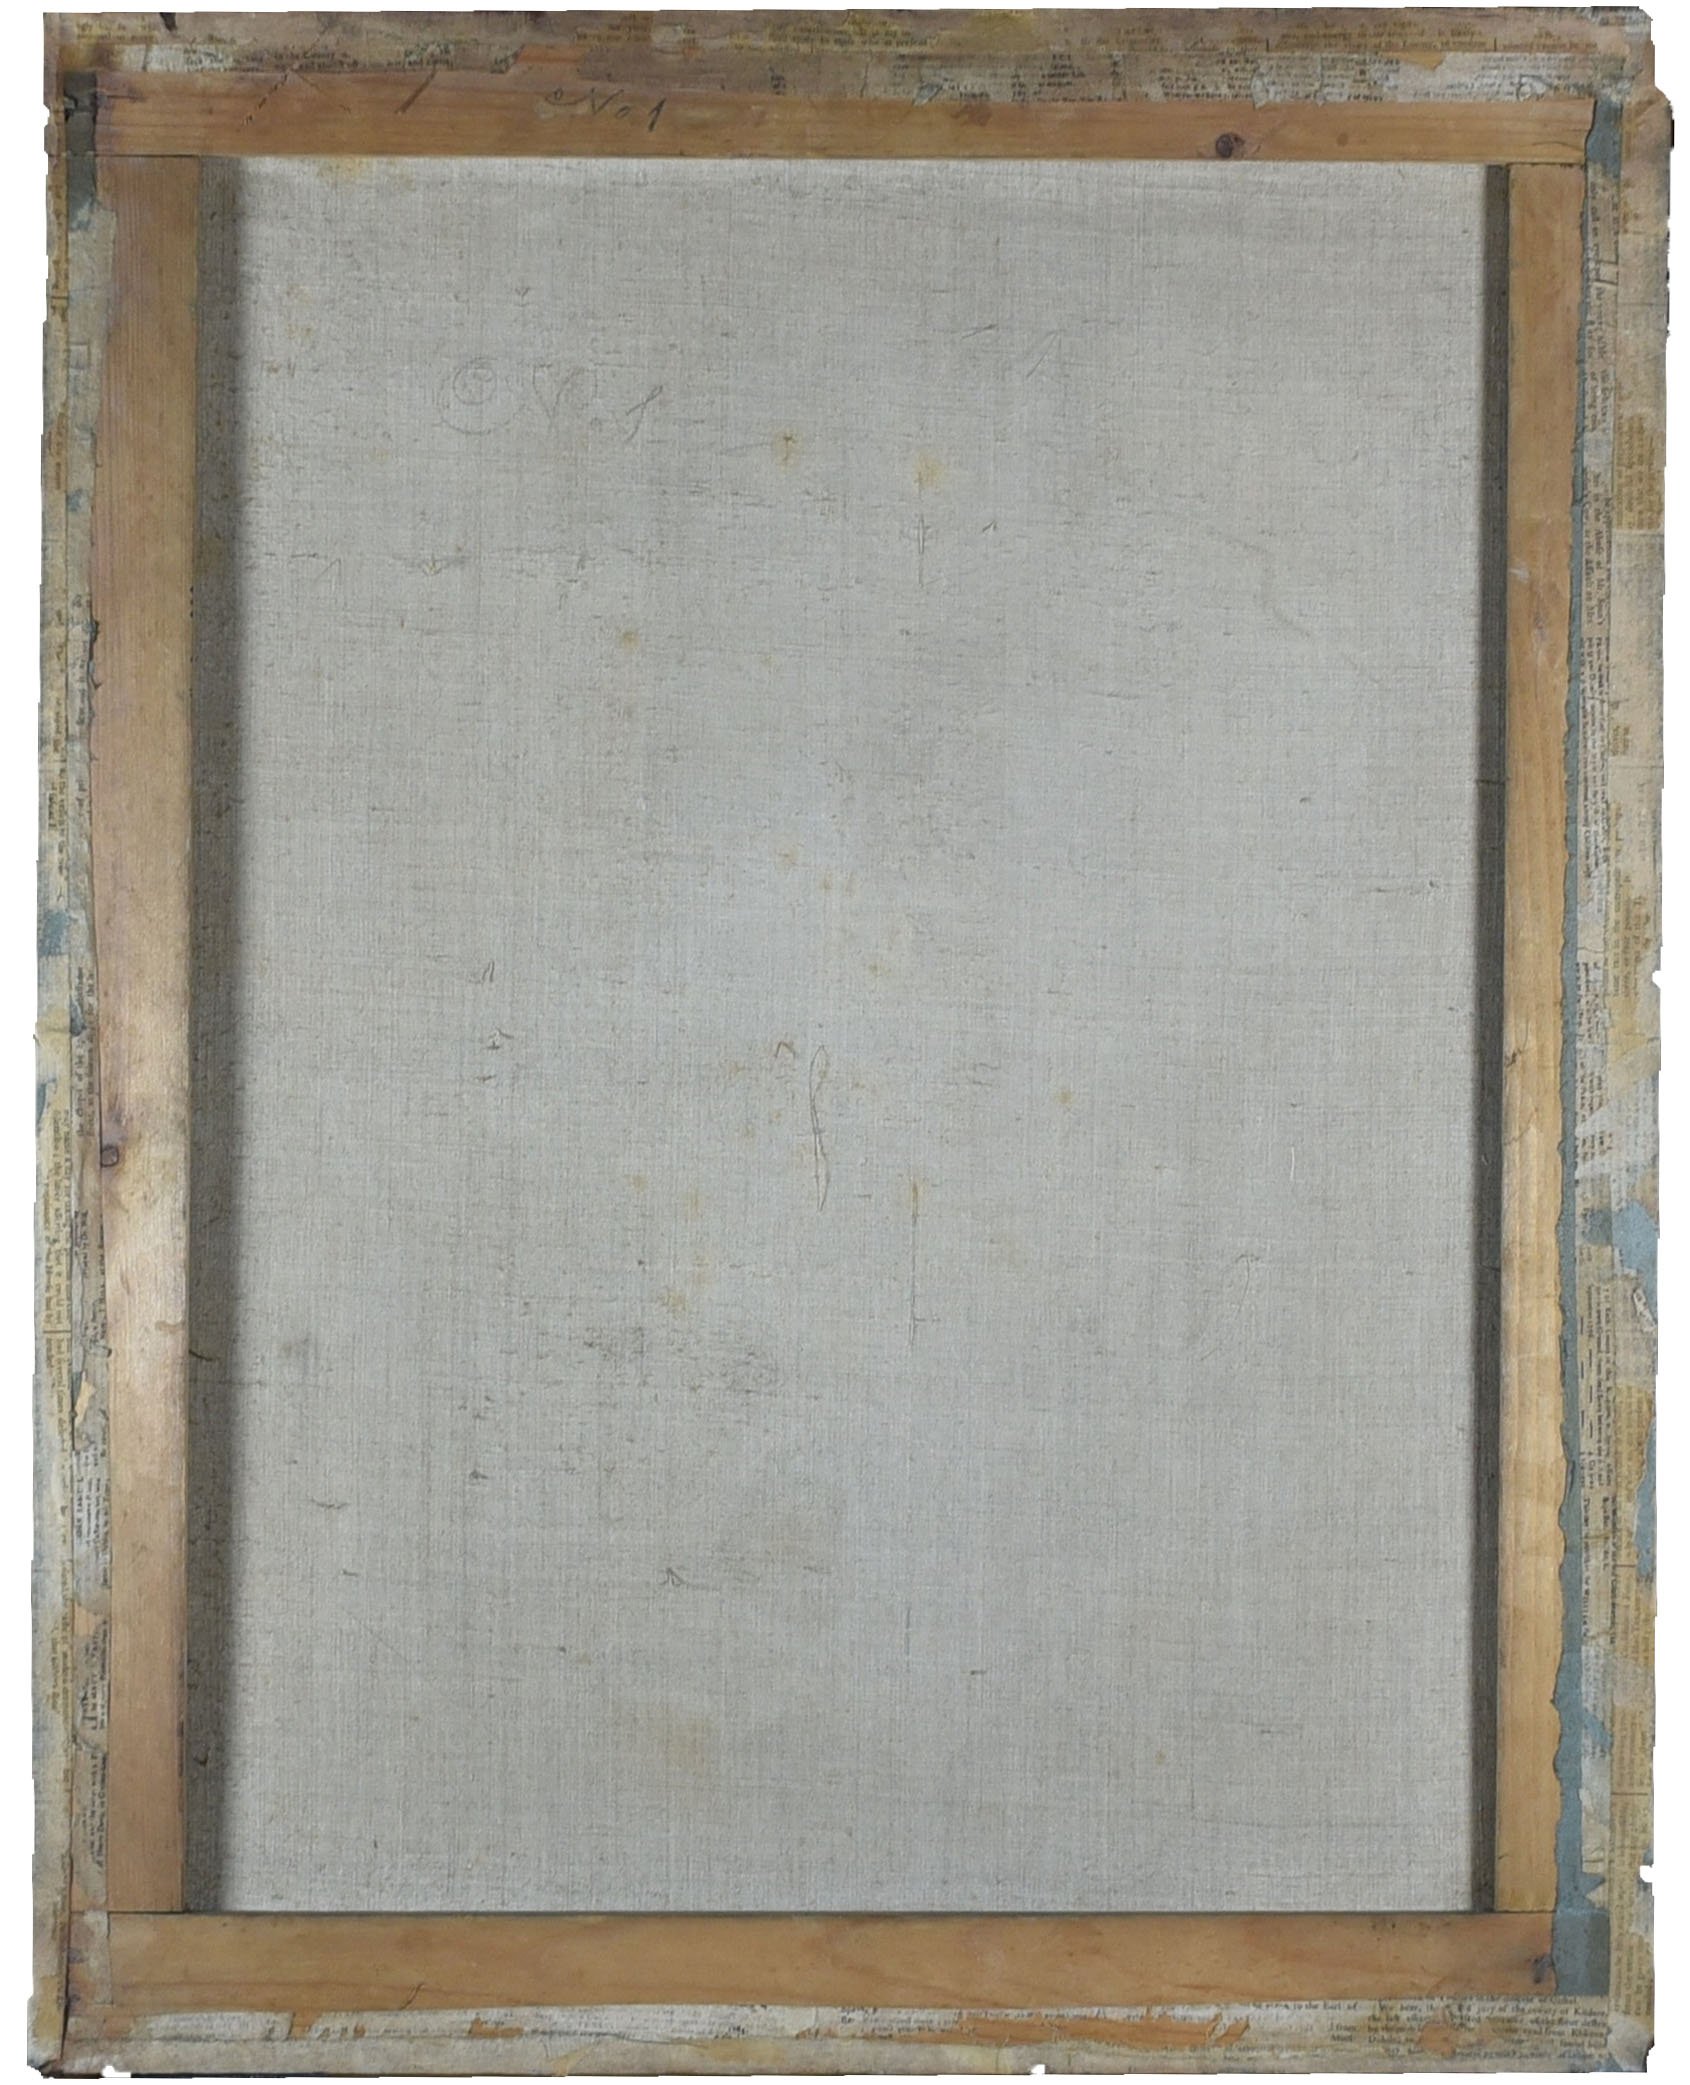 Structure of the pastel format of 'A Personification of Spring' (c. 1730), showing the wooden strainer lined with canvas, and the blue paper adhered over the top. The scraps of newspaper are specific to this pastel, and are later additions.